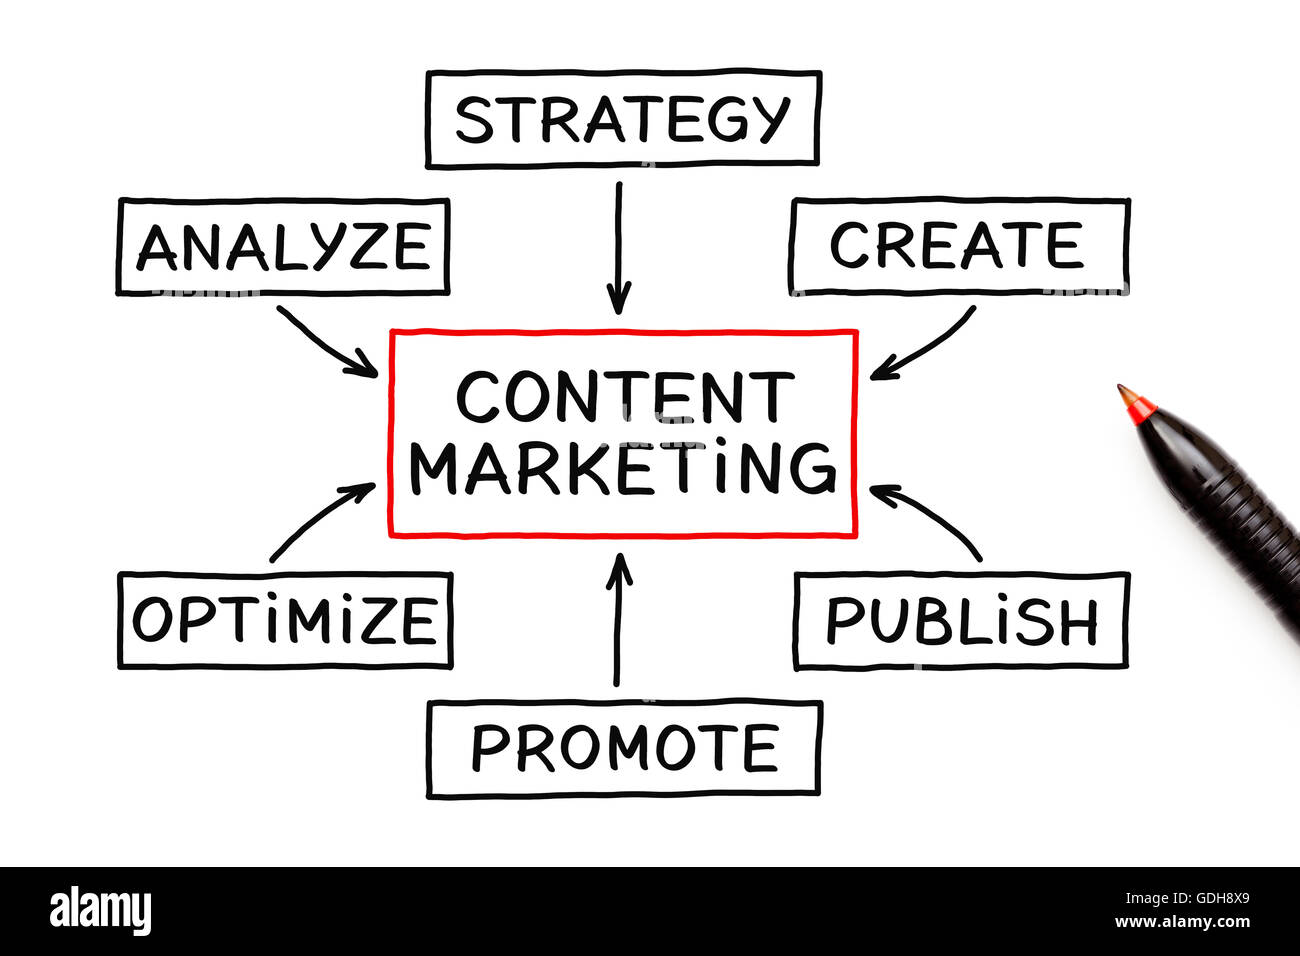 Content Marketing flow chart on white background. Stock Photo